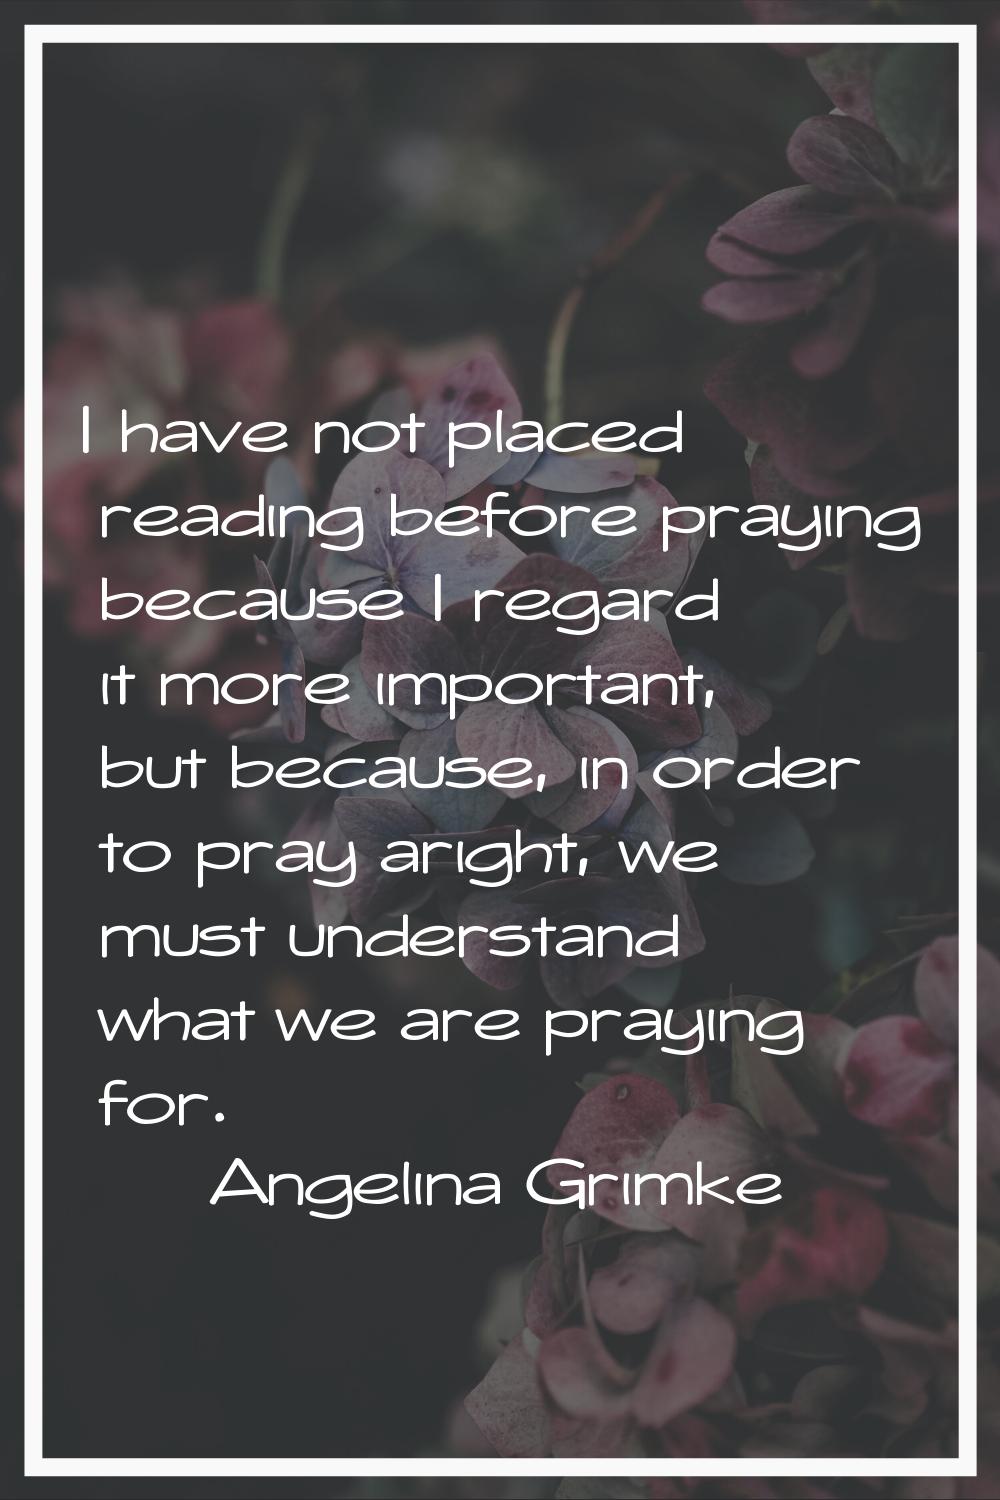 I have not placed reading before praying because I regard it more important, but because, in order 